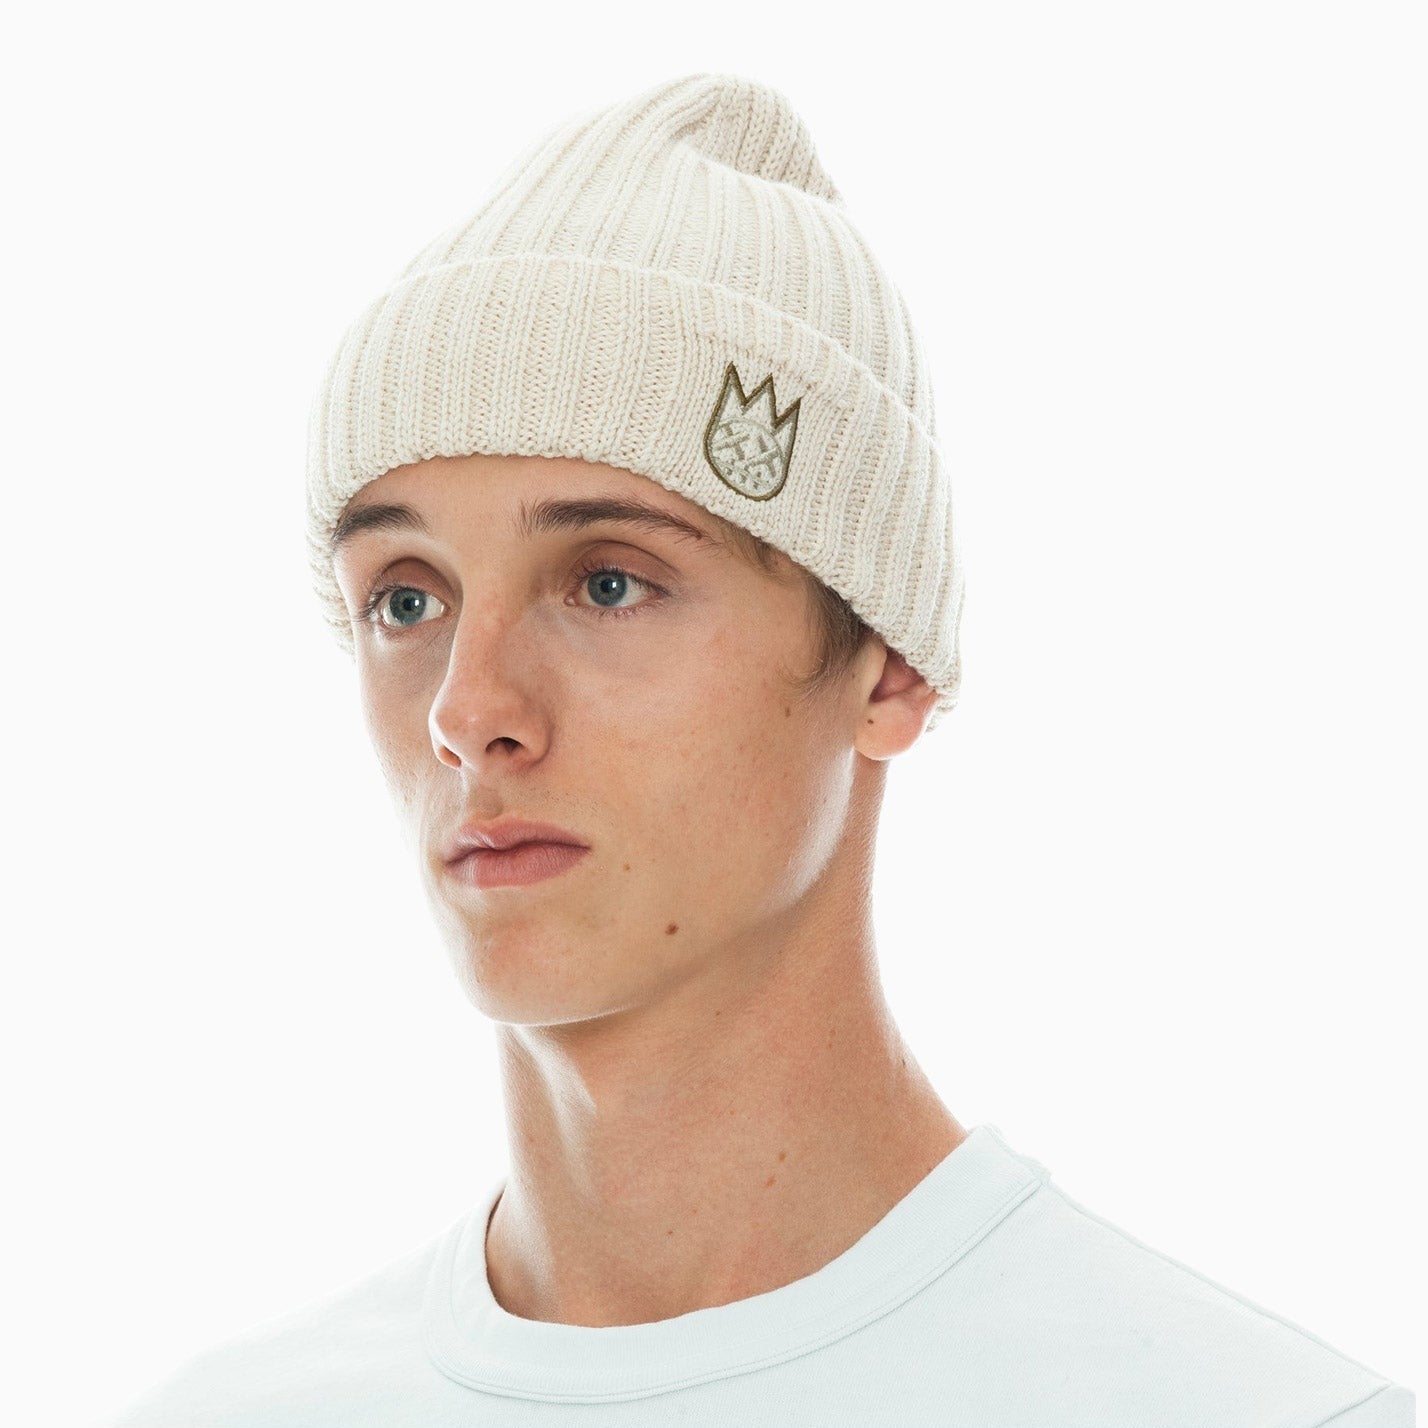 cult-of-individuality-mens-knit-hat-with-clean-2-tone-shimuchan-logo-in-winter-white-623bc-ch88a